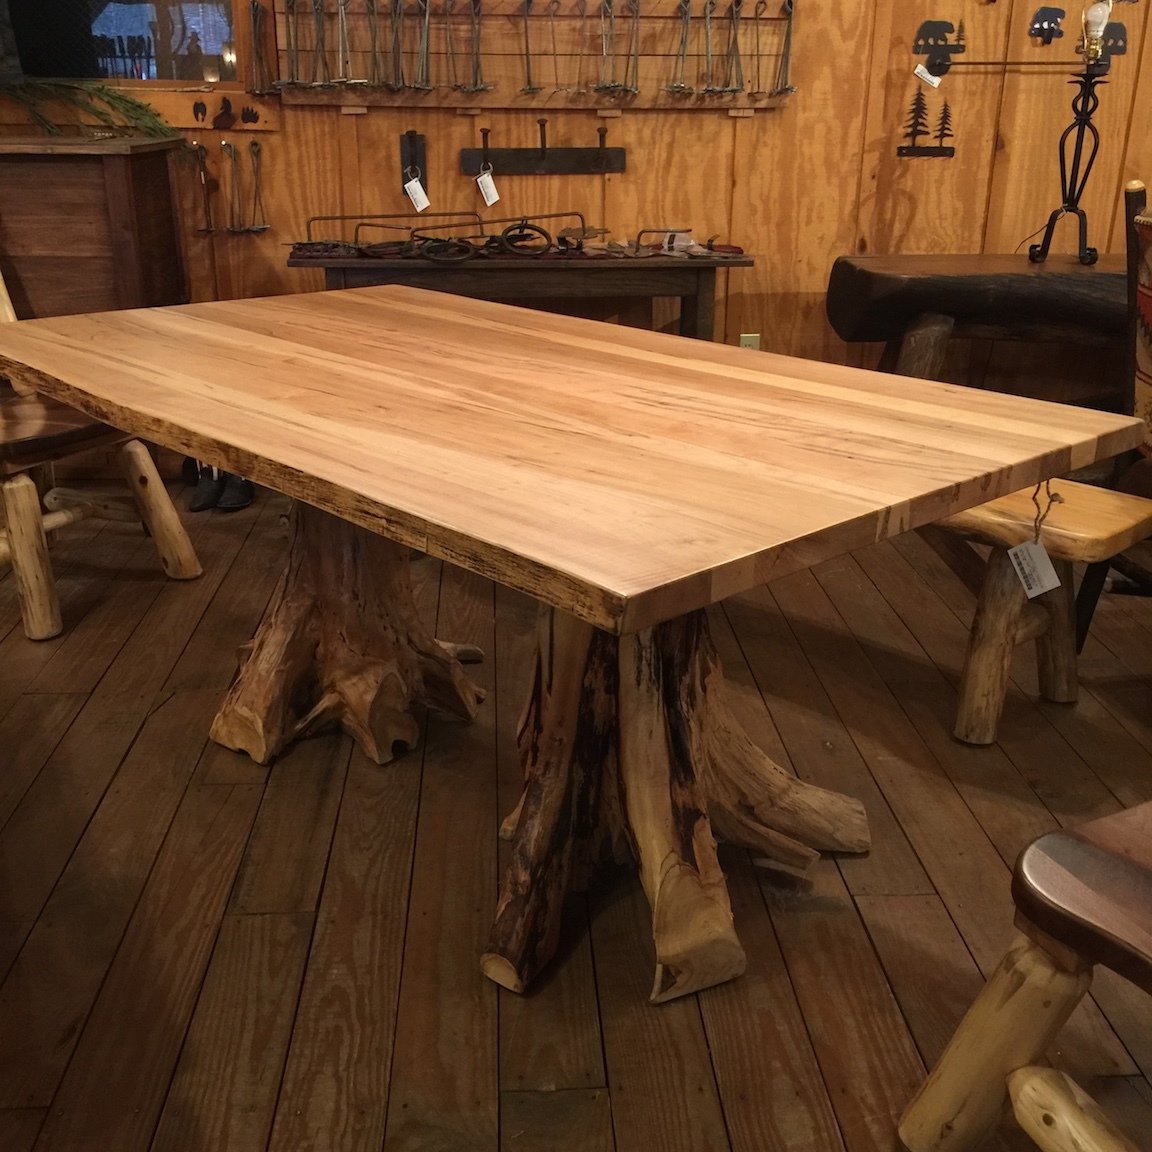 Double Stump Table - Spalted Maple Top